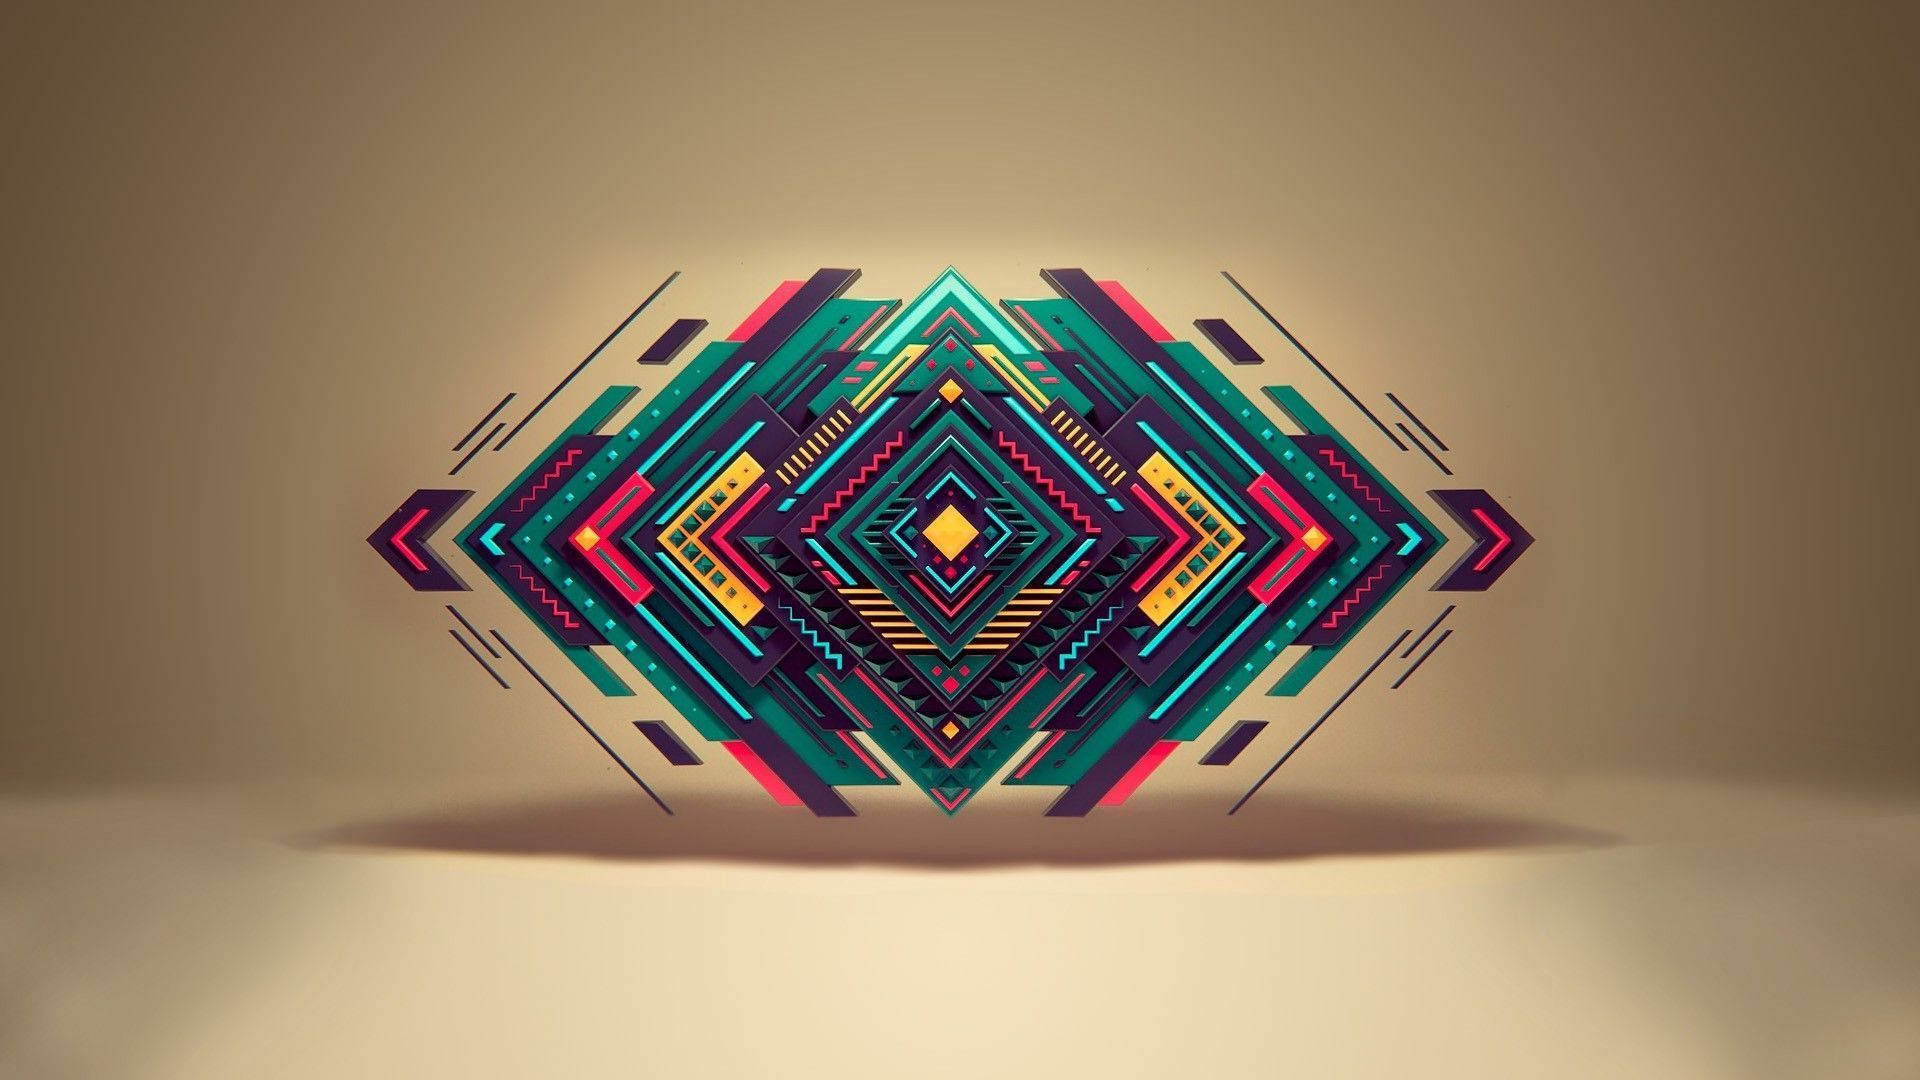 Get lost in this intricate, abstract diamond art Wallpaper